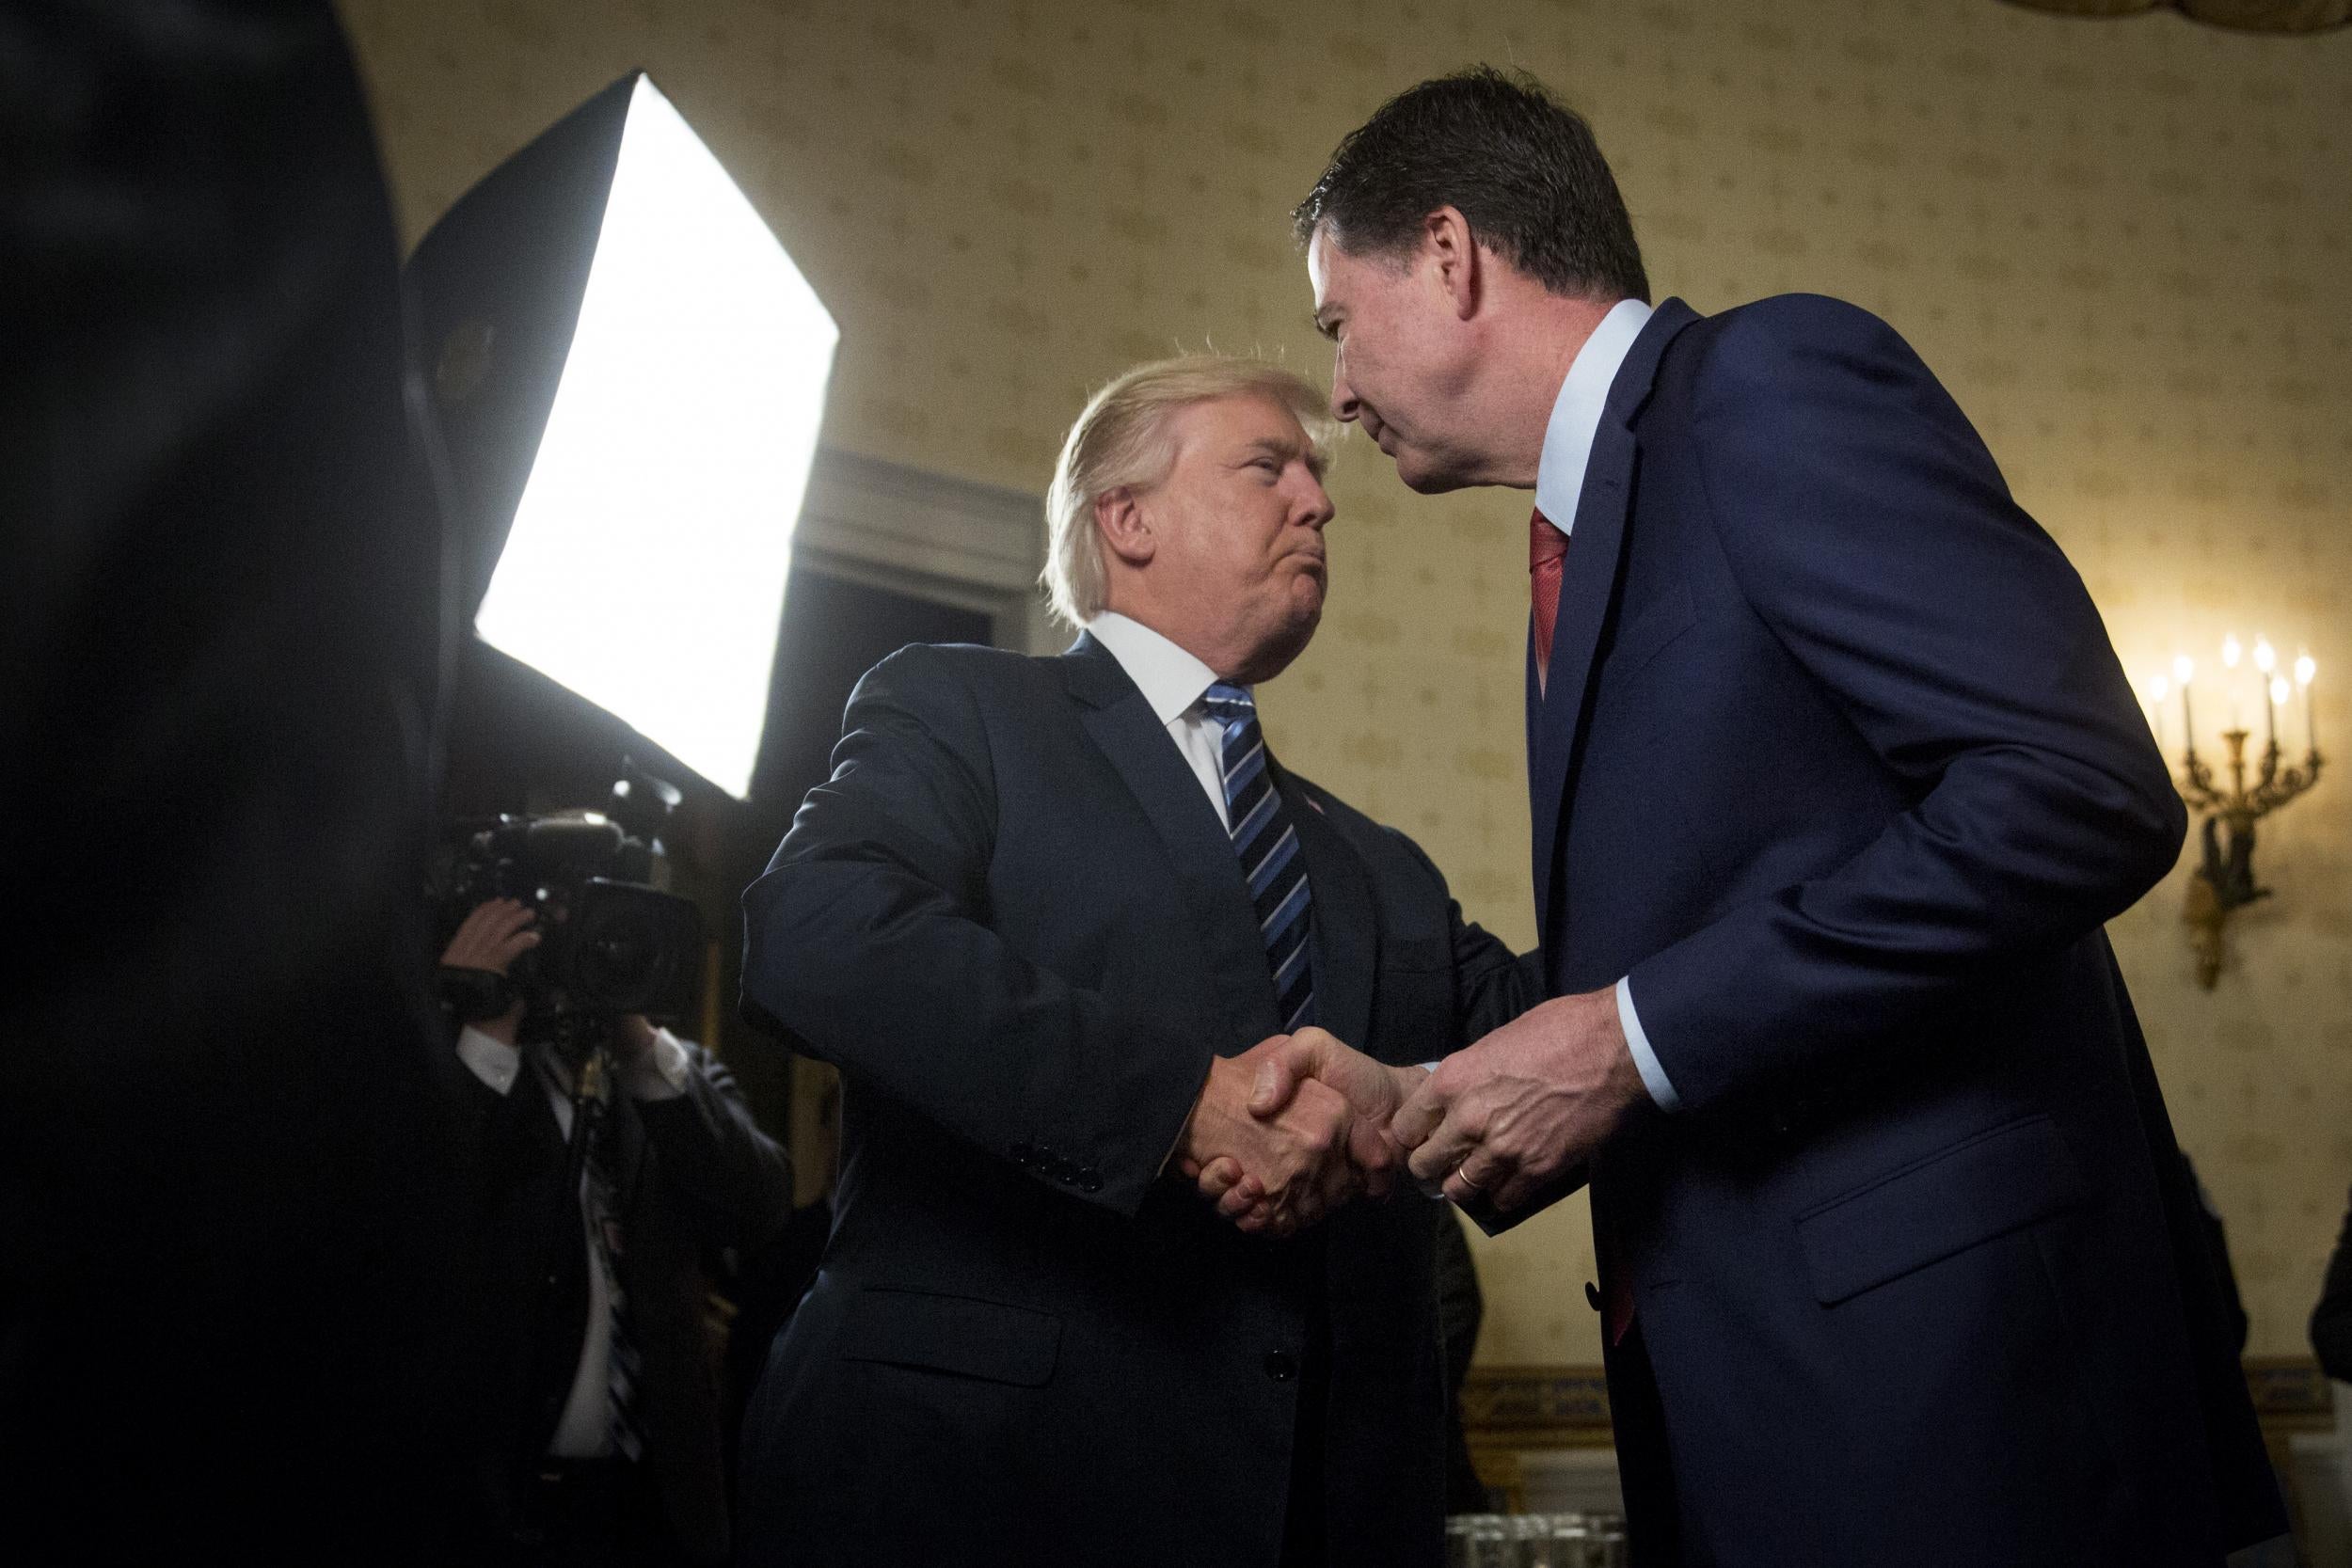 Trump&apos;s lawyers called former FBI director James Comey &apos;Machiavellian&apos; and dishonest in memo to Russia investigation